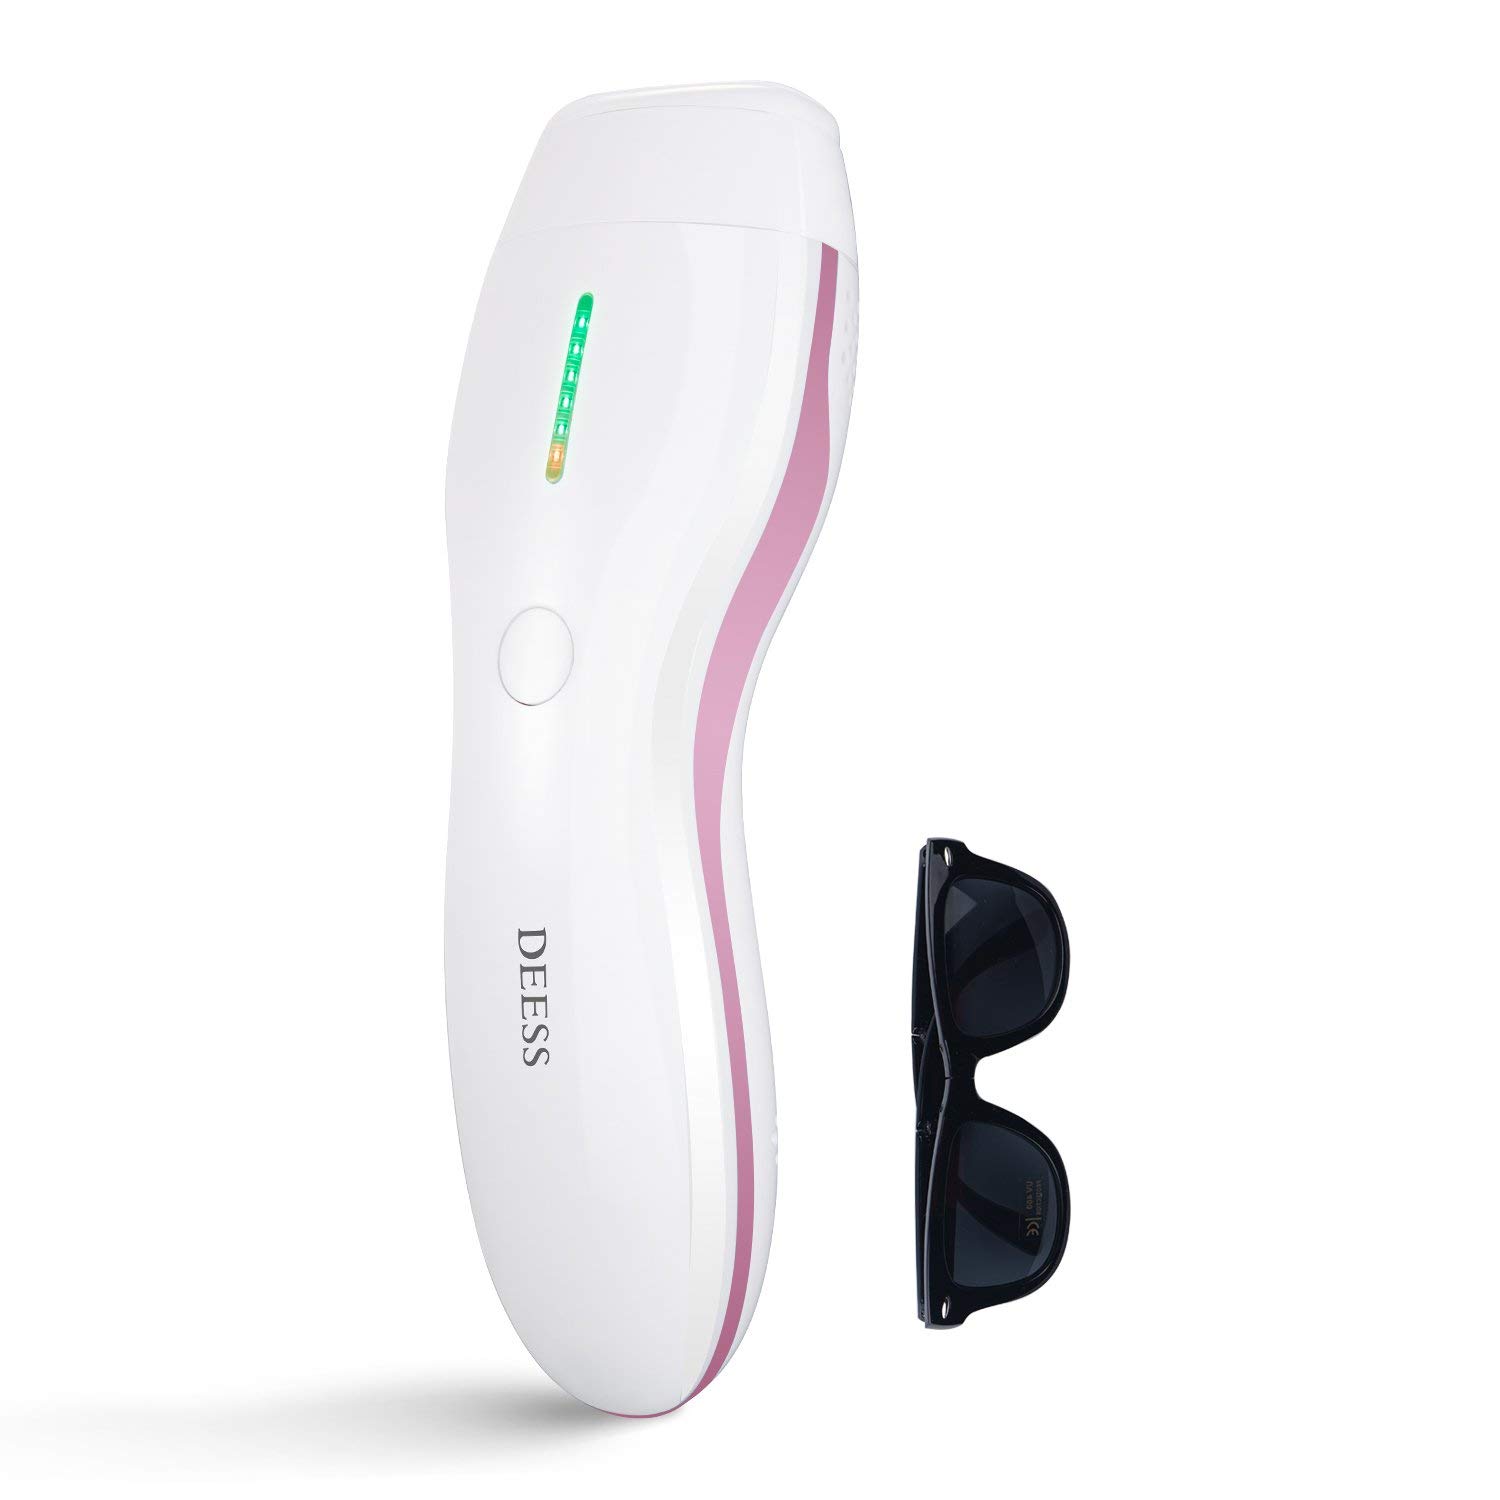 DEESS Series 3 Plus Permanent Hair Removal Device